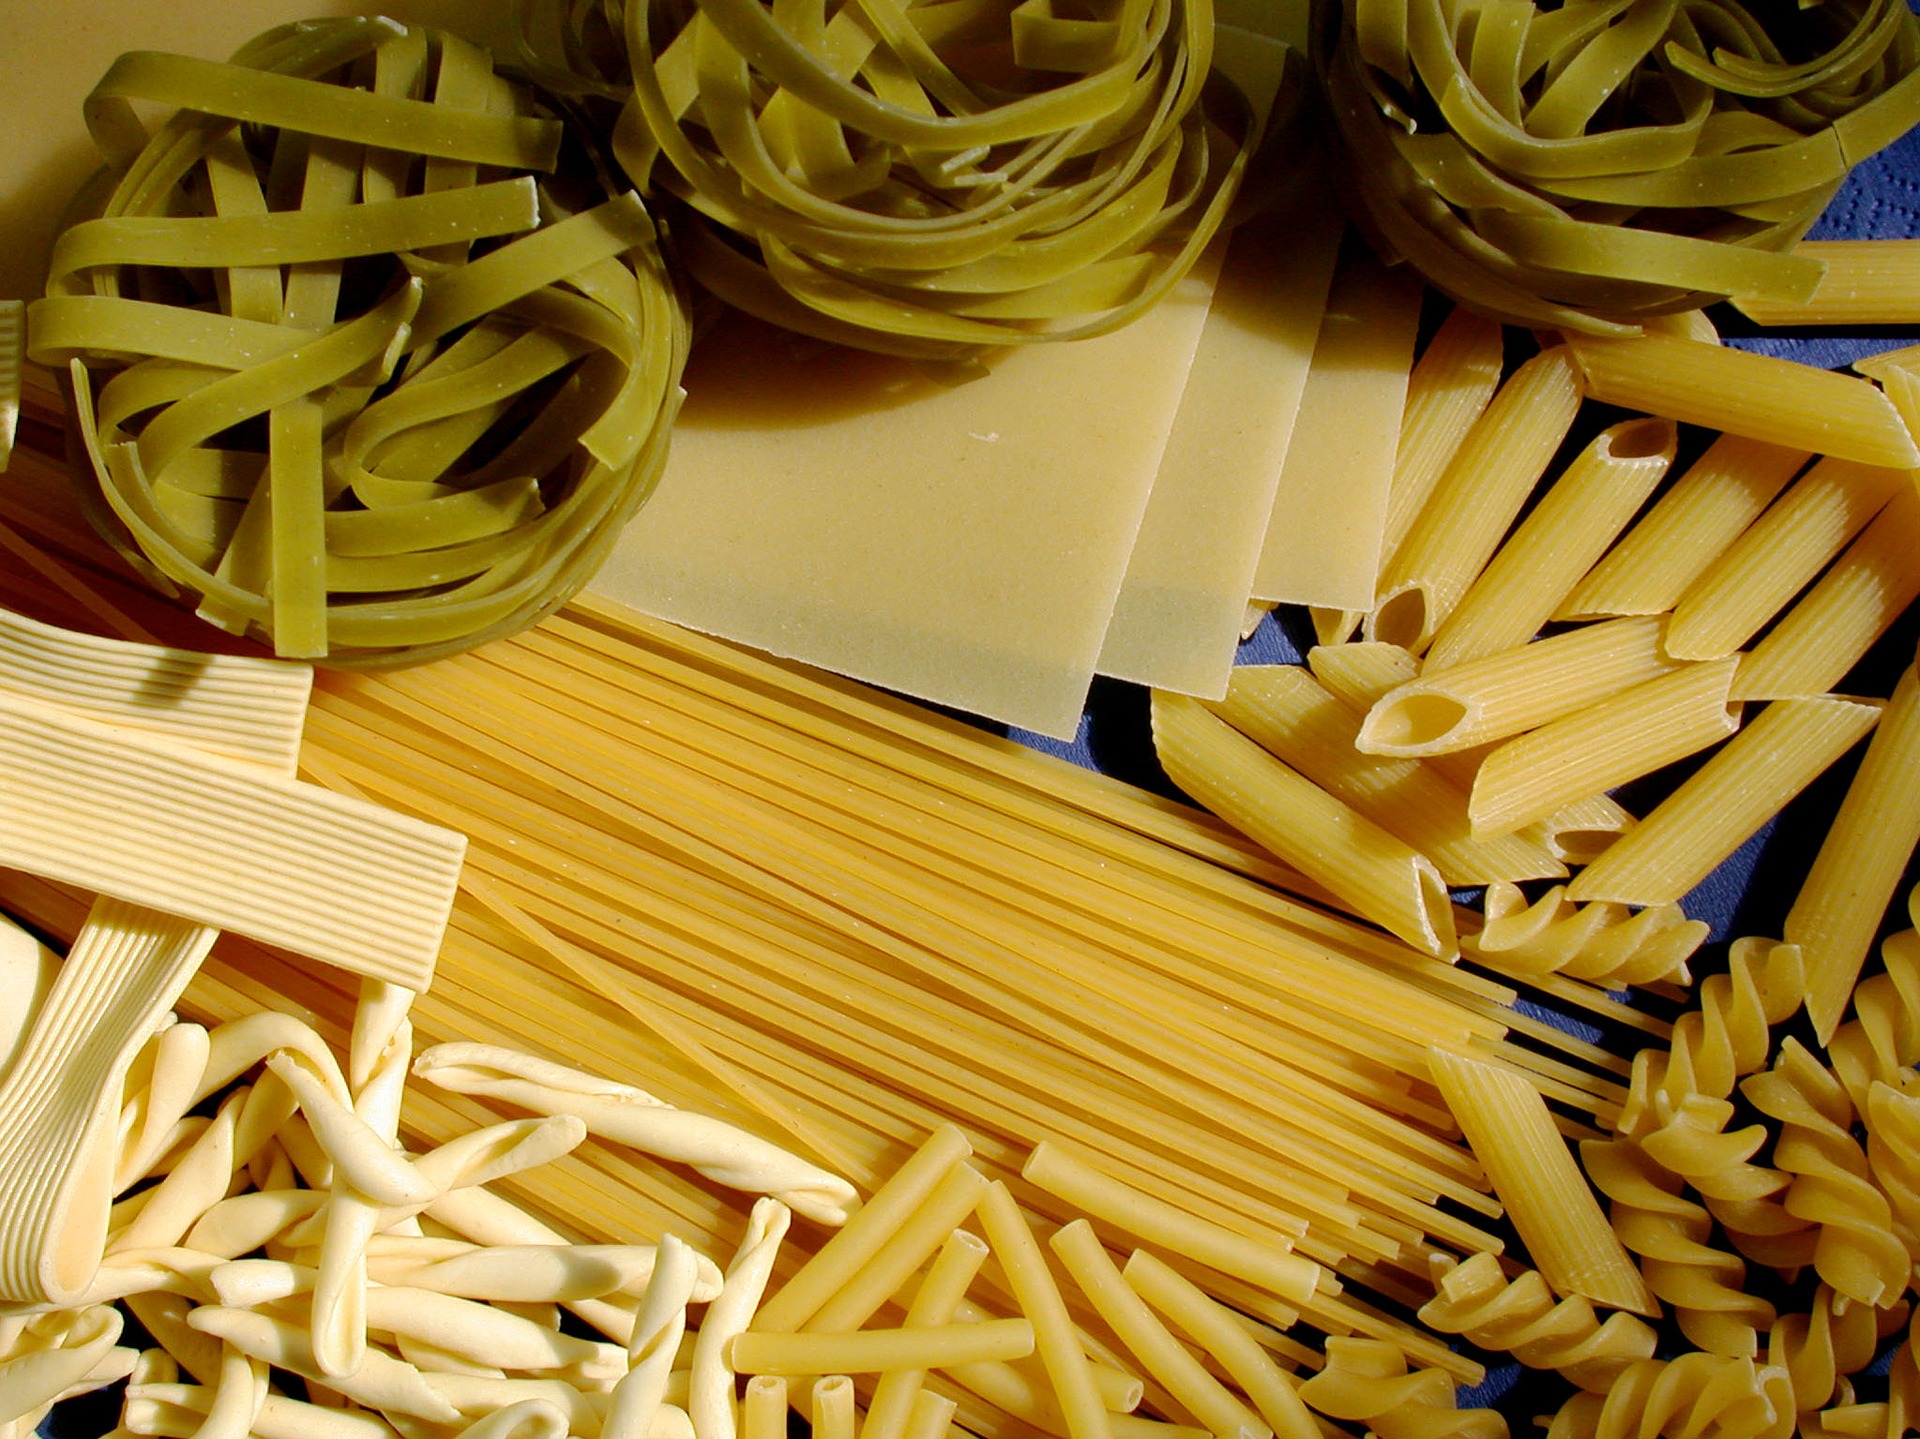 20 Different Pasta Shapes - Types of Pasta Shapes and Names